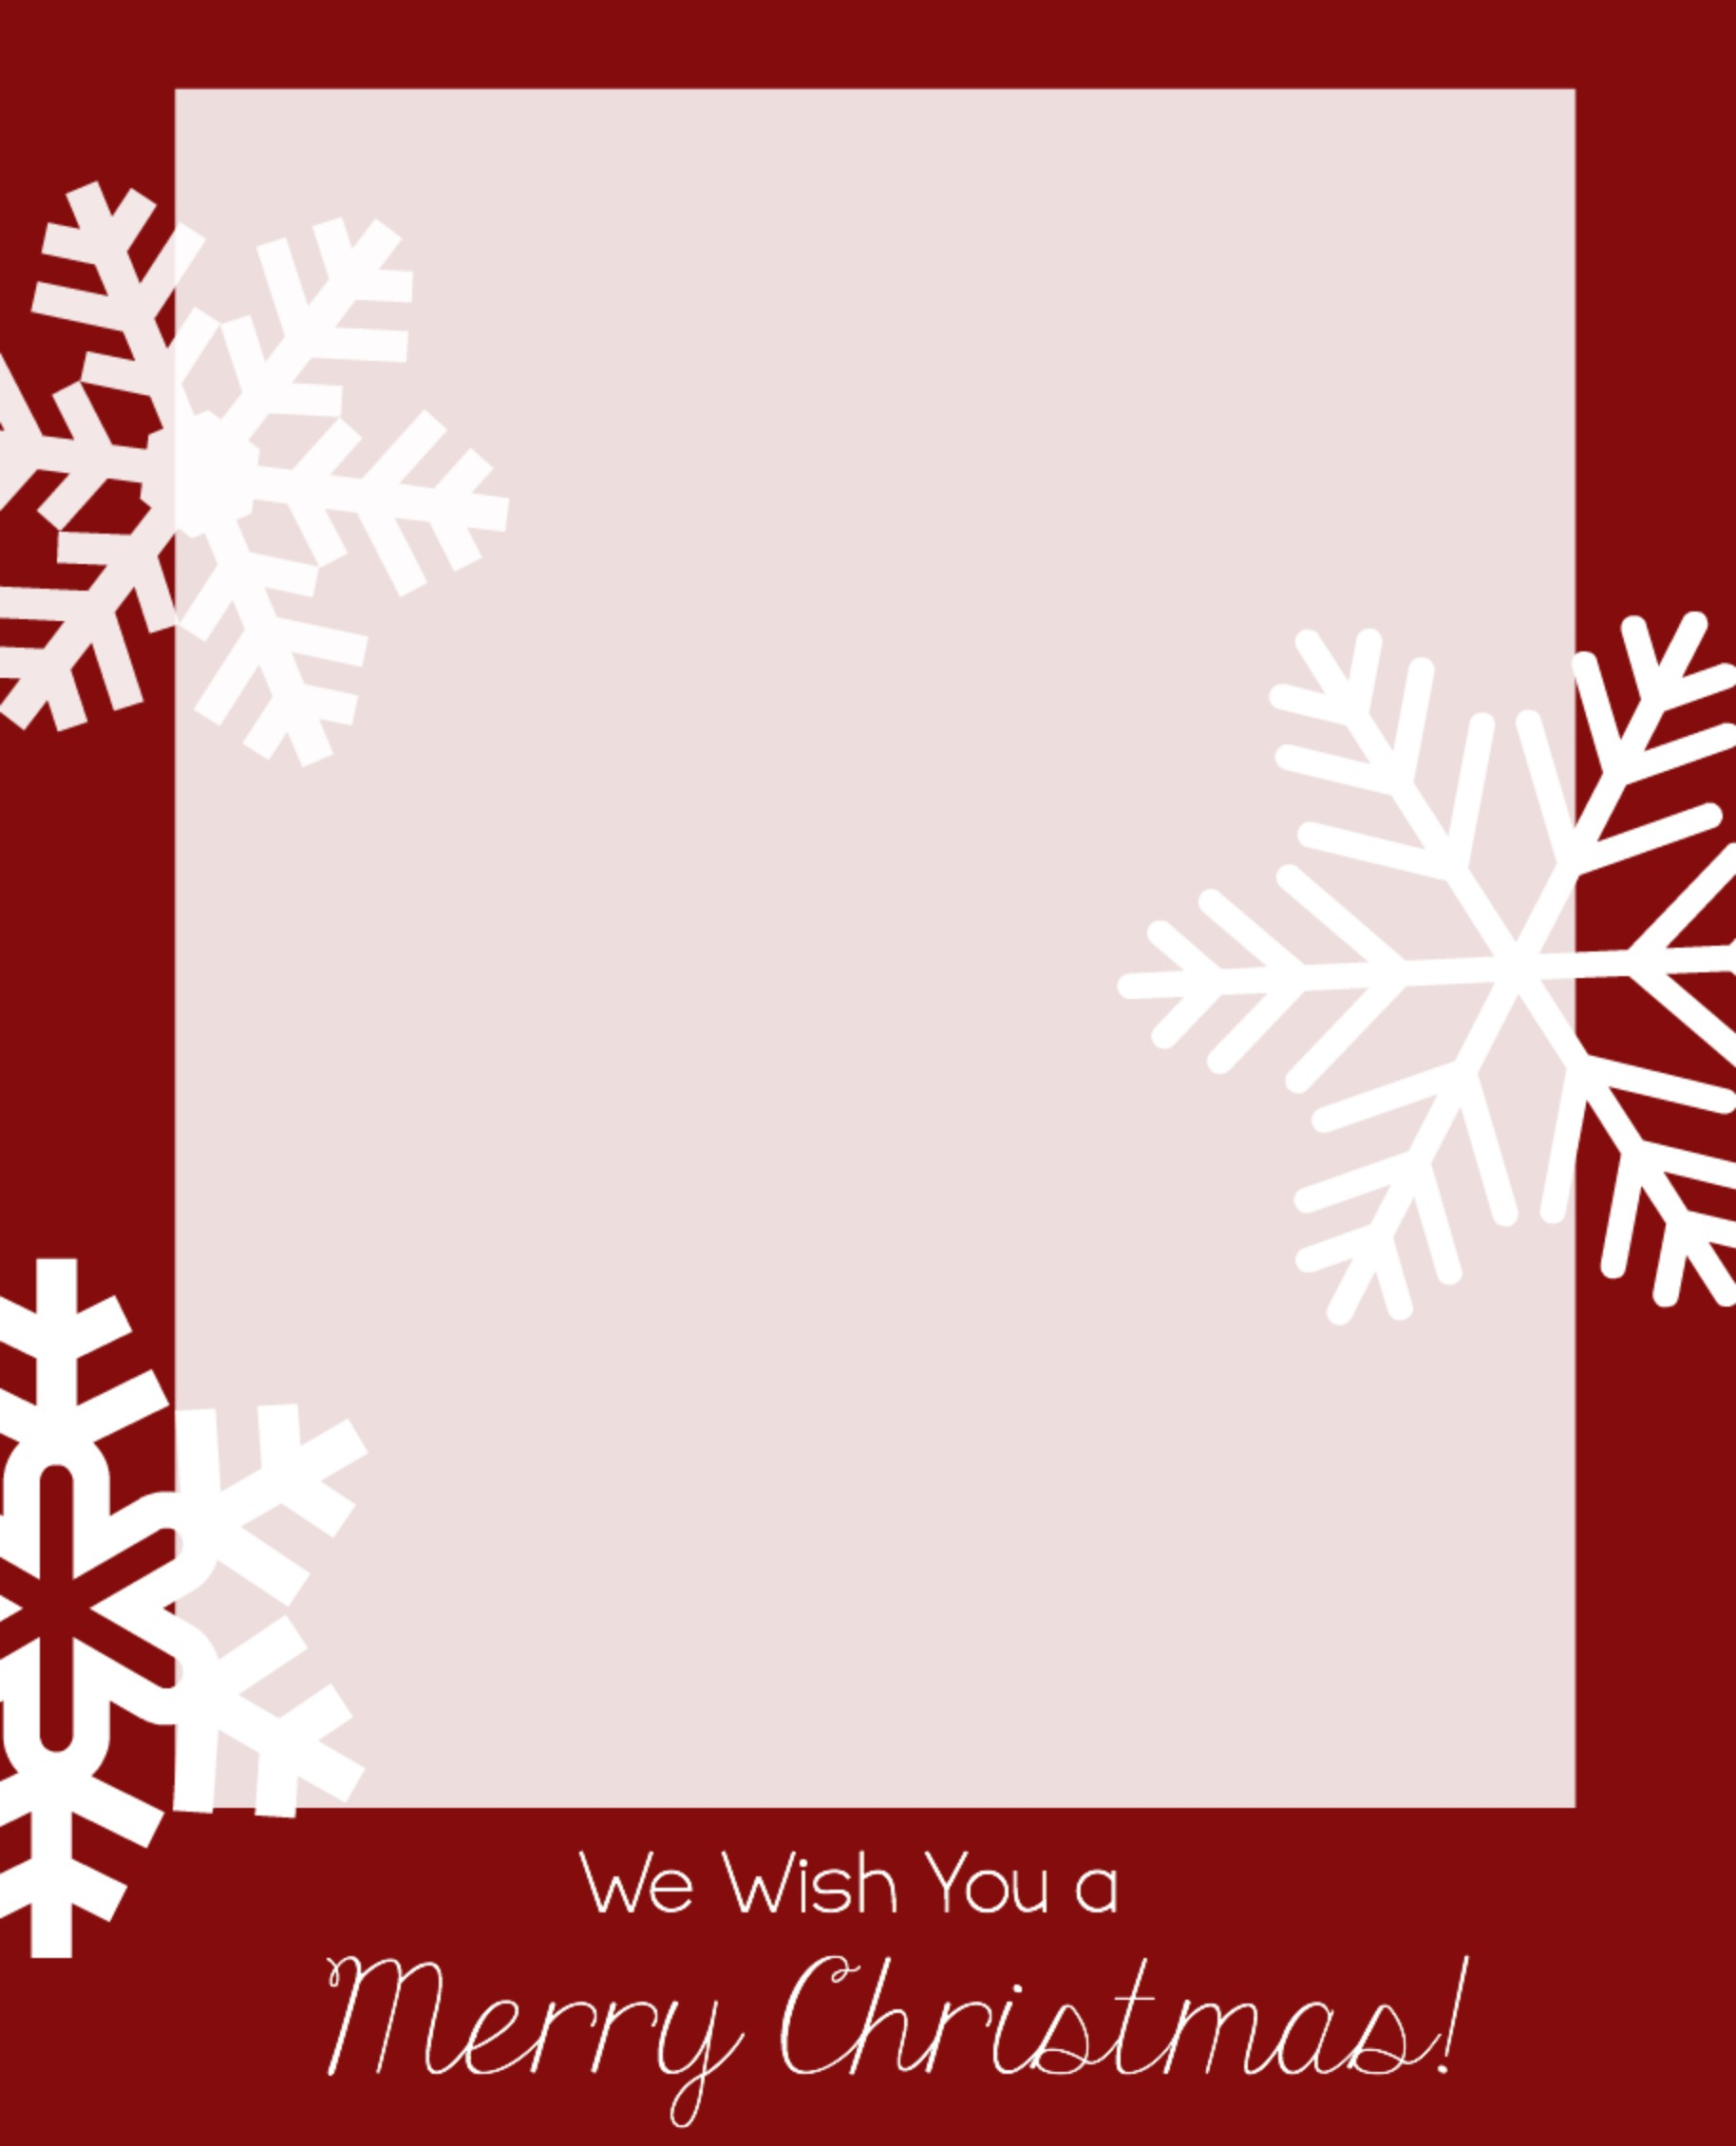 Free Christmas Card Templates - Crazy Little Projects - Free Printable Christmas Card Templates